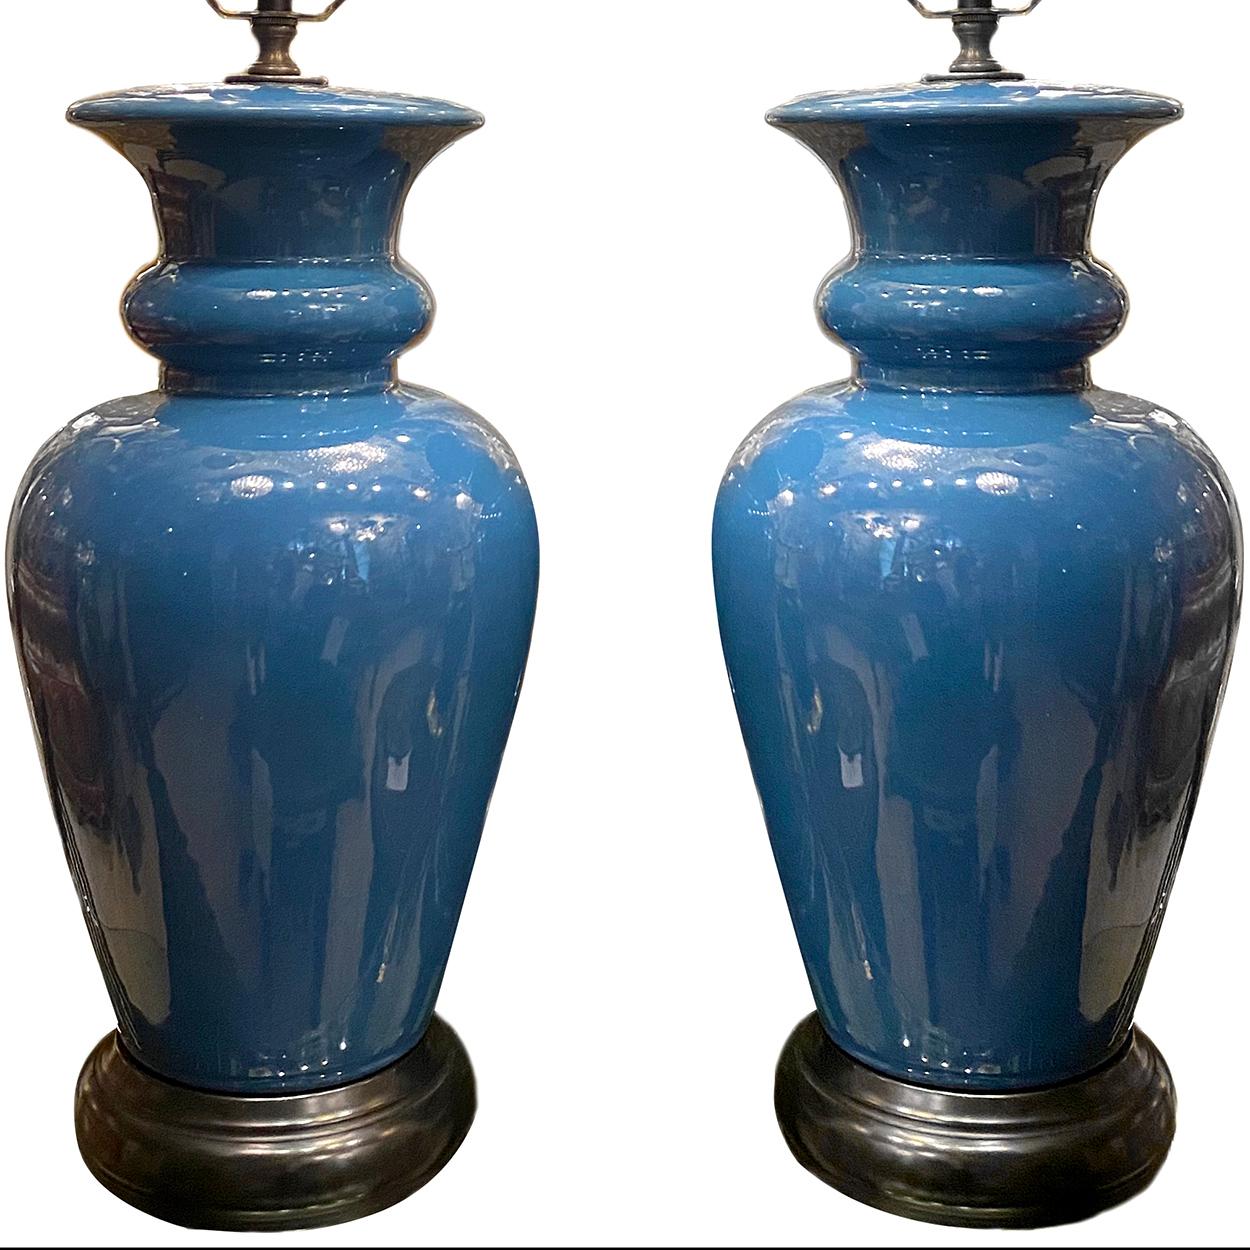 A pair of circa 1960's French porcelain table lamps.

Measurements:
Height of body: 17